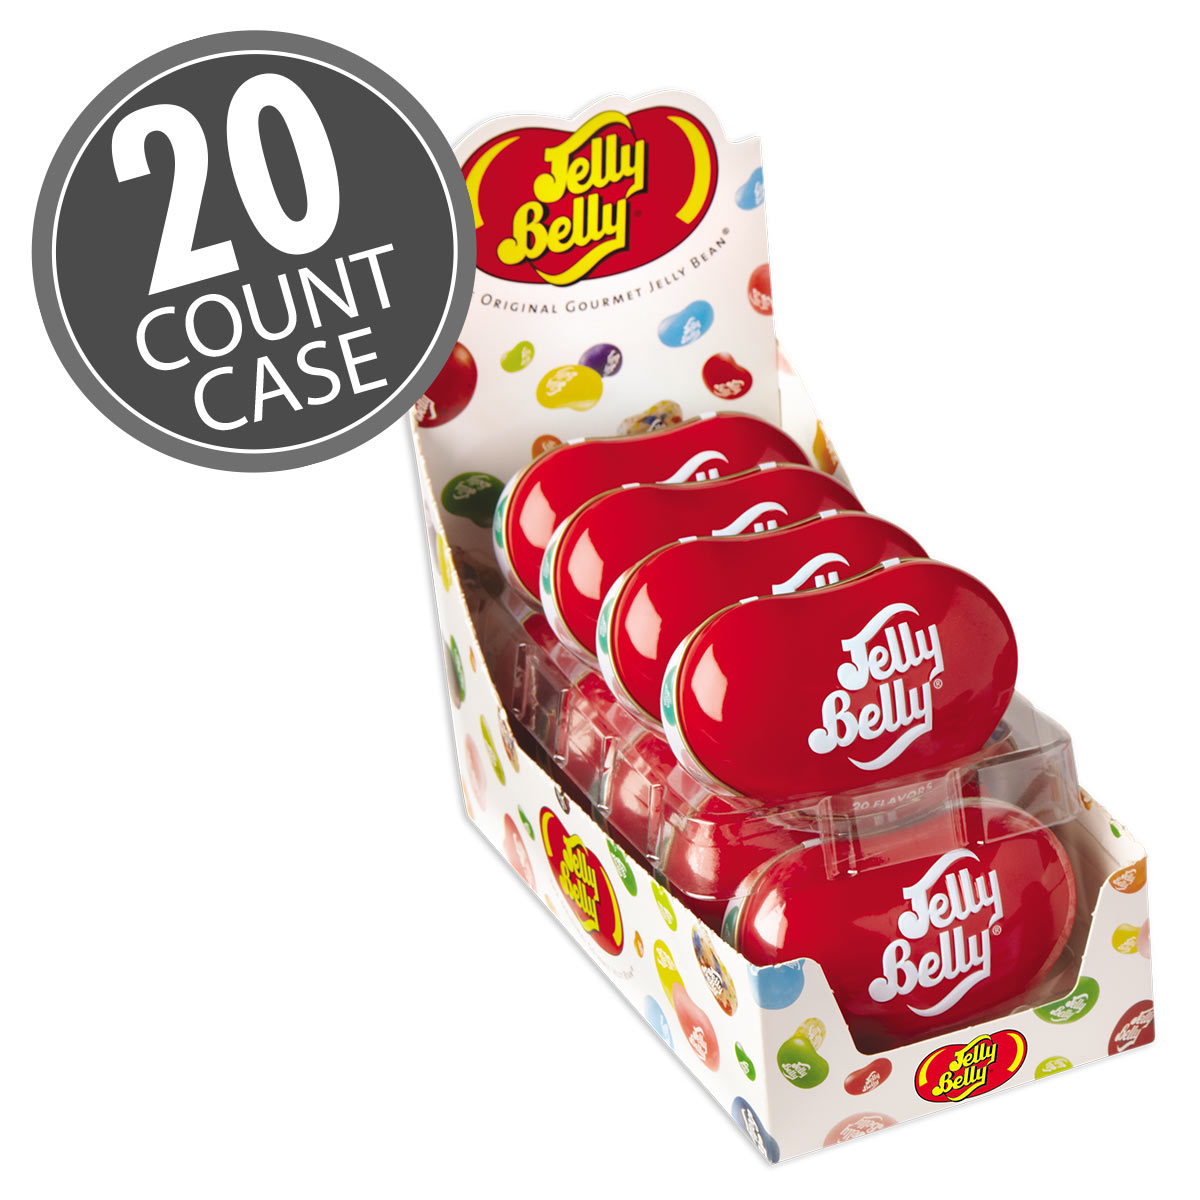 Jelly Belly Bean Tin with 1.7 oz of assorted flavor jelly beans. The bean-shaped container can be refilled with other candy! 20-count case.